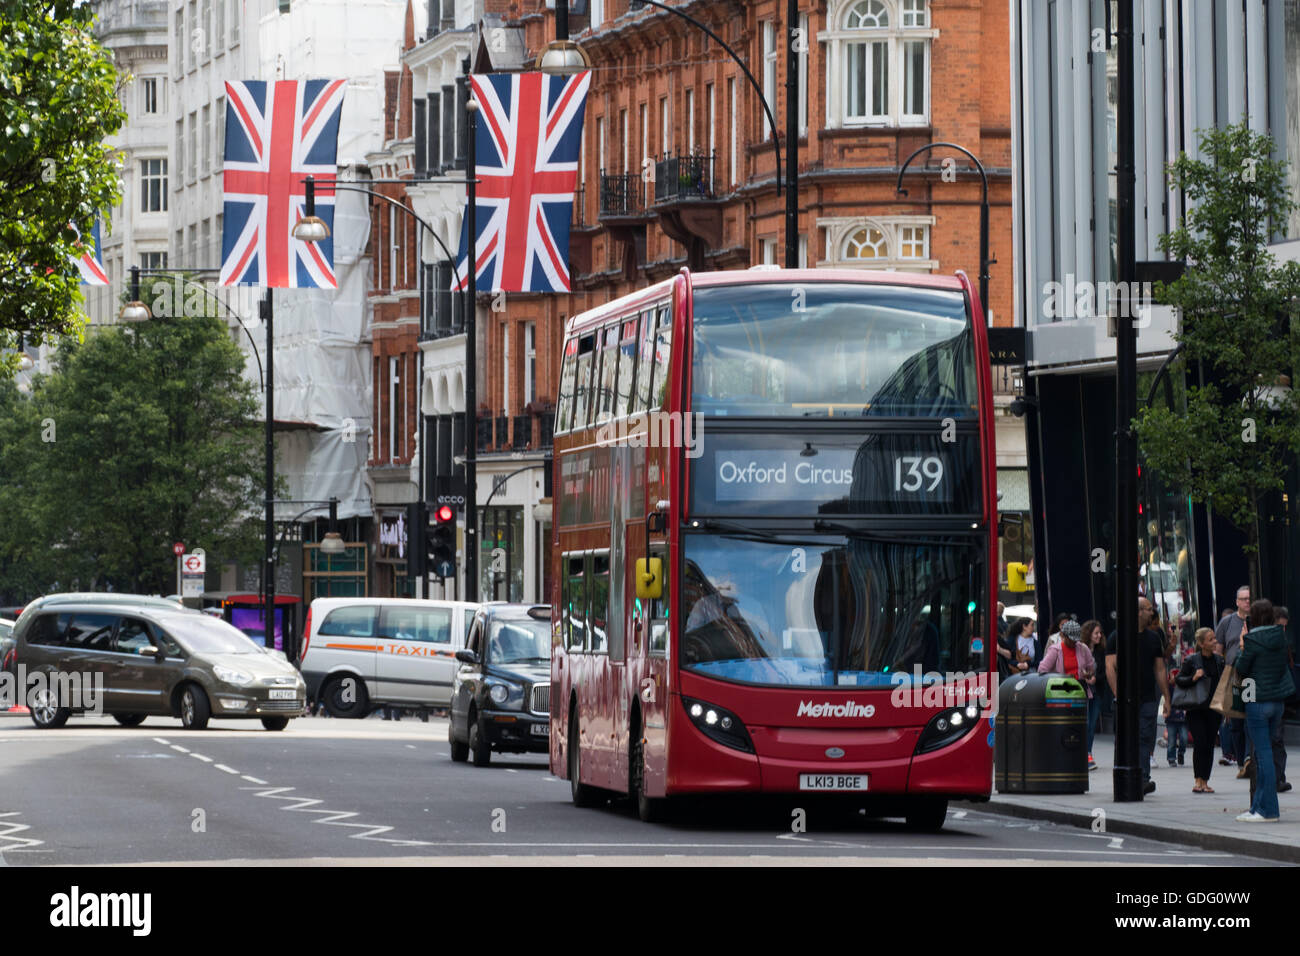 Typical Double-Decker red bus in central London with United kingdom flags in the background Stock Photo